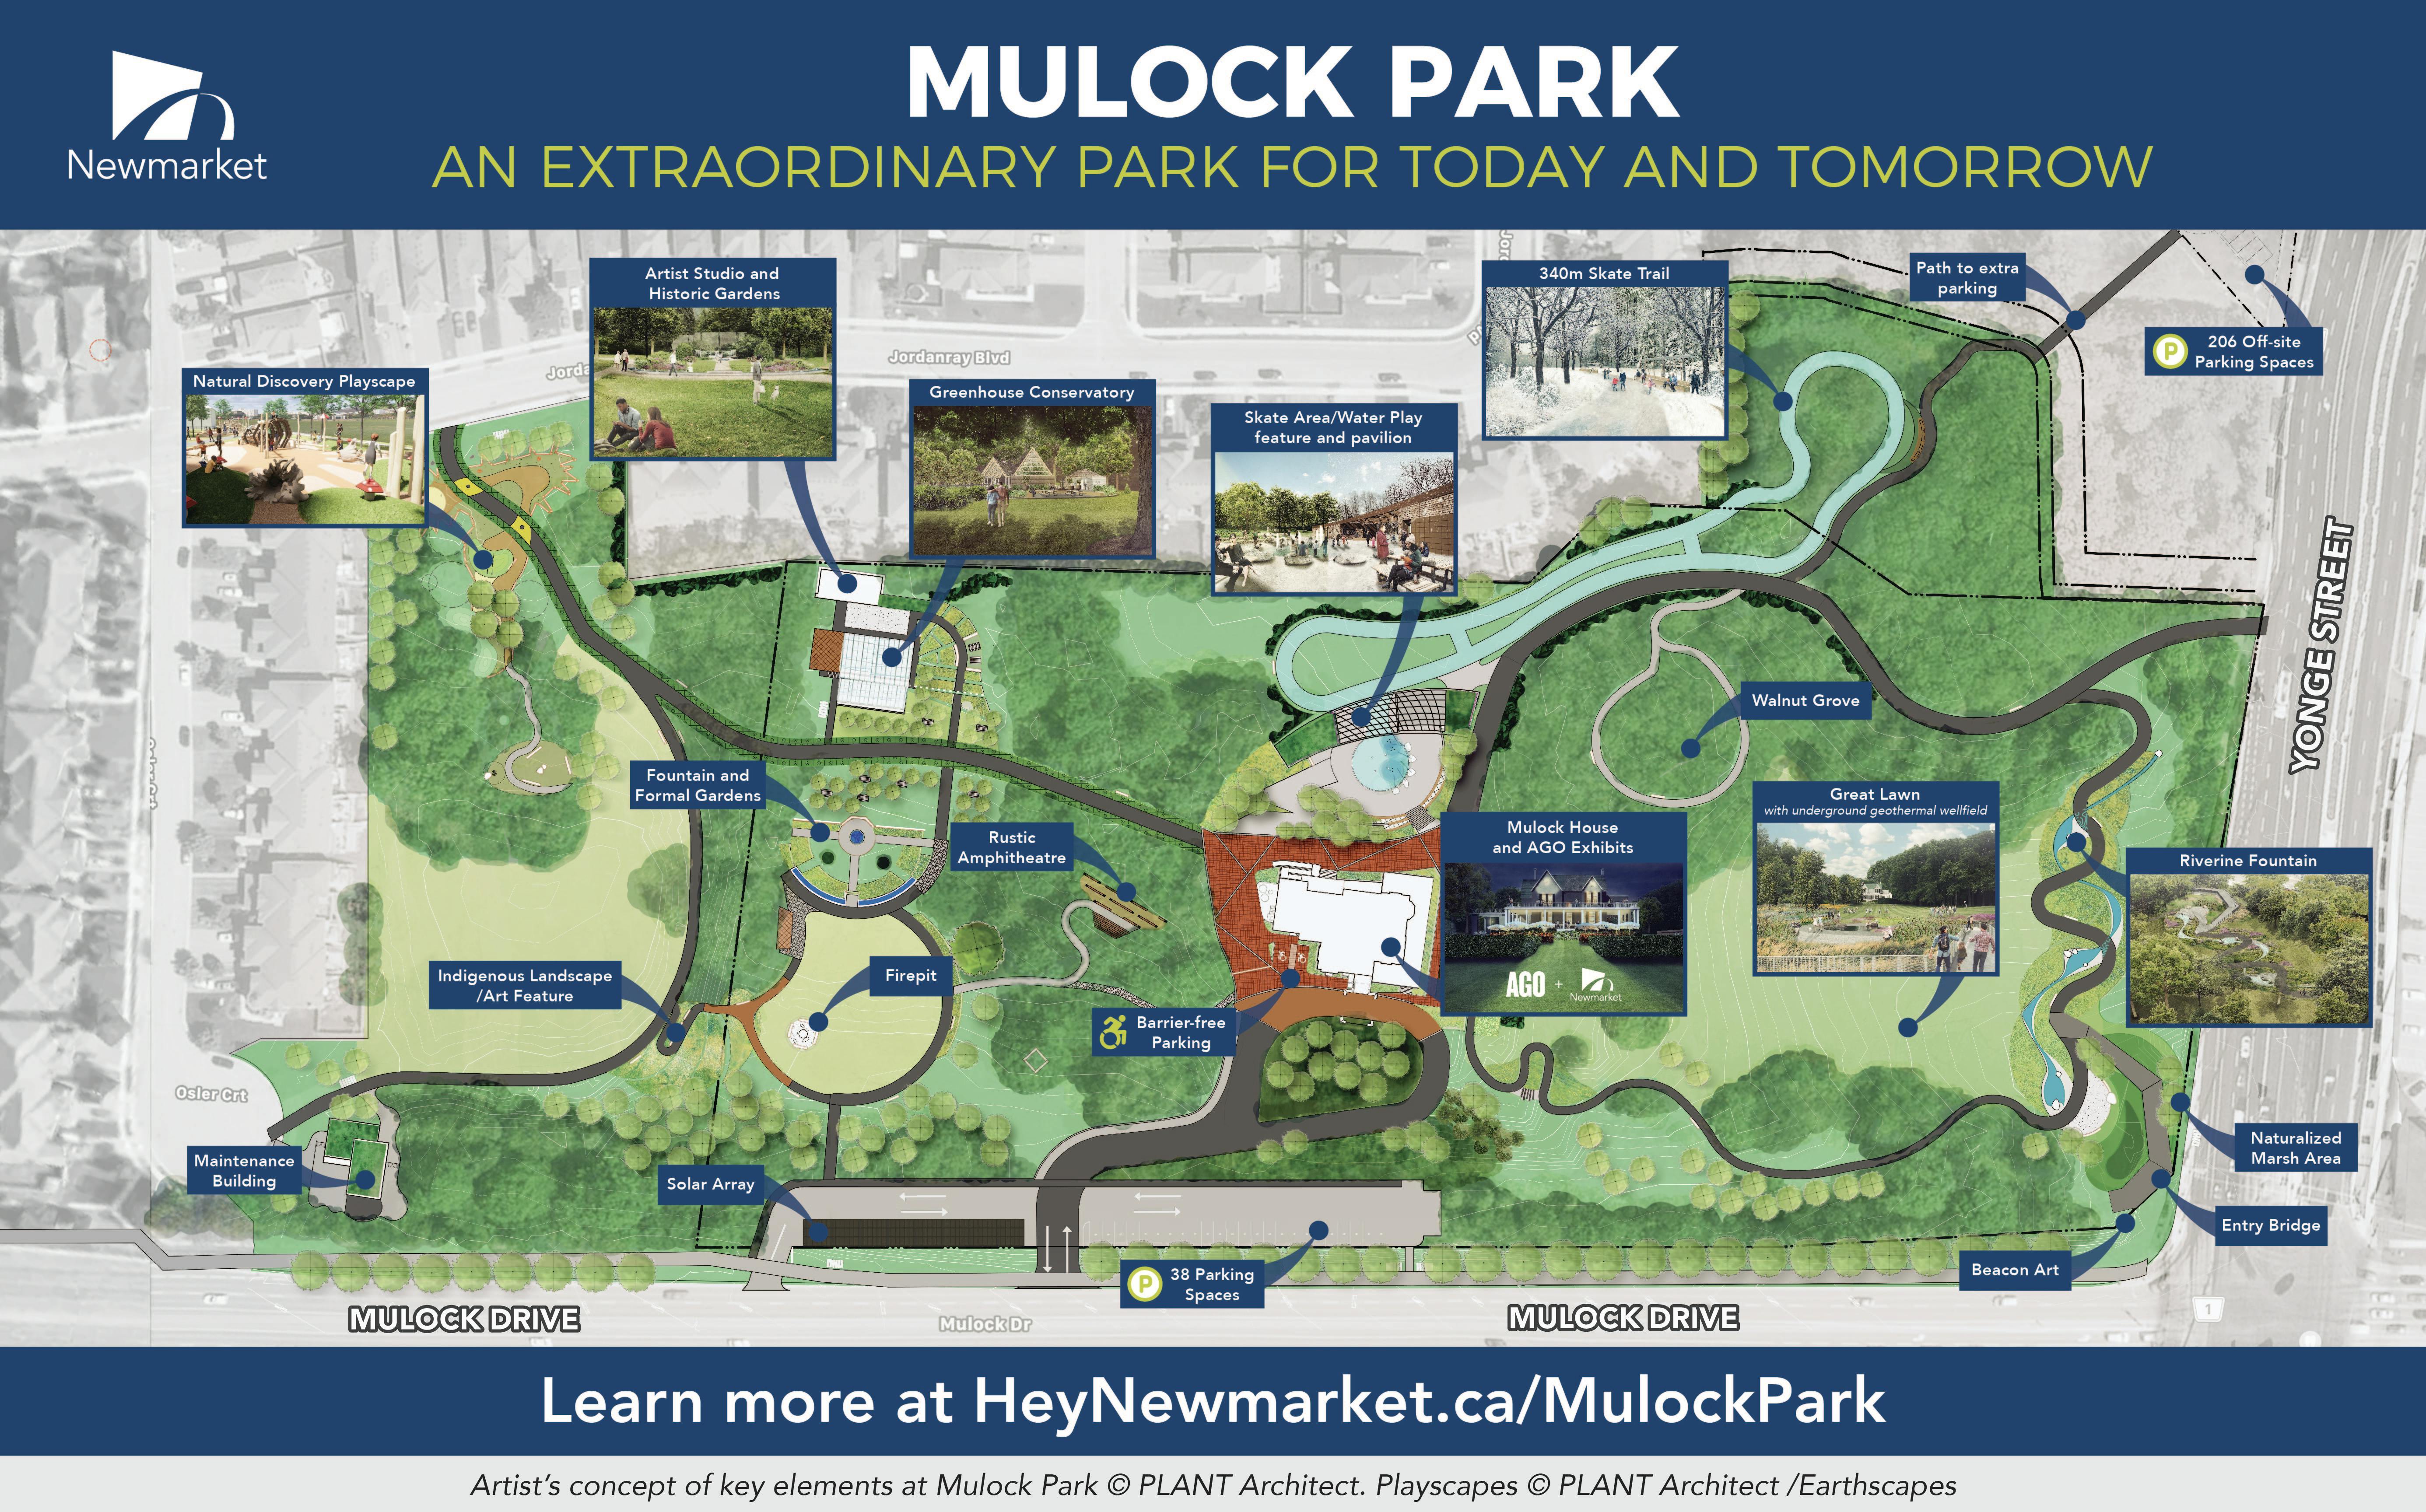 Map of Mulock Park and its features